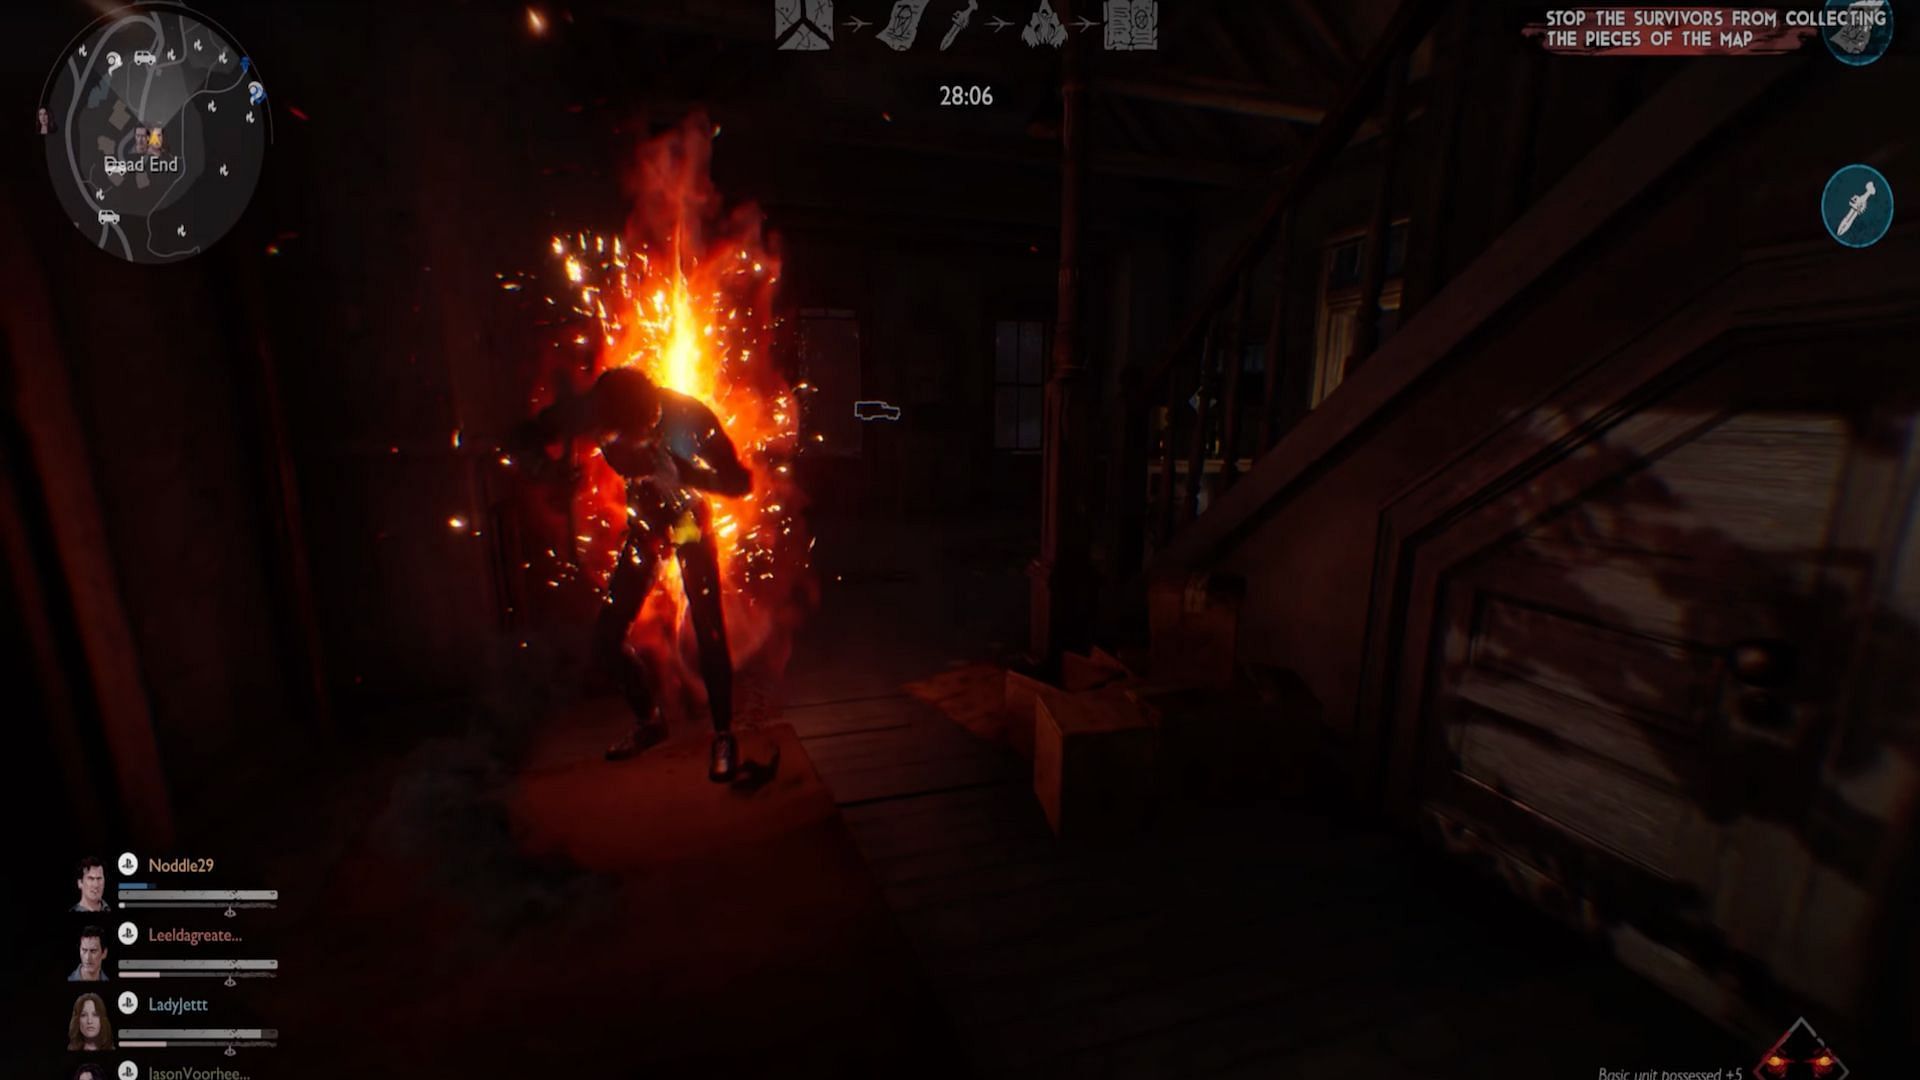 Players can control a Kandarian Demon to defeat the Survivors (Image via SIMPLYAMAZING/YouTube)